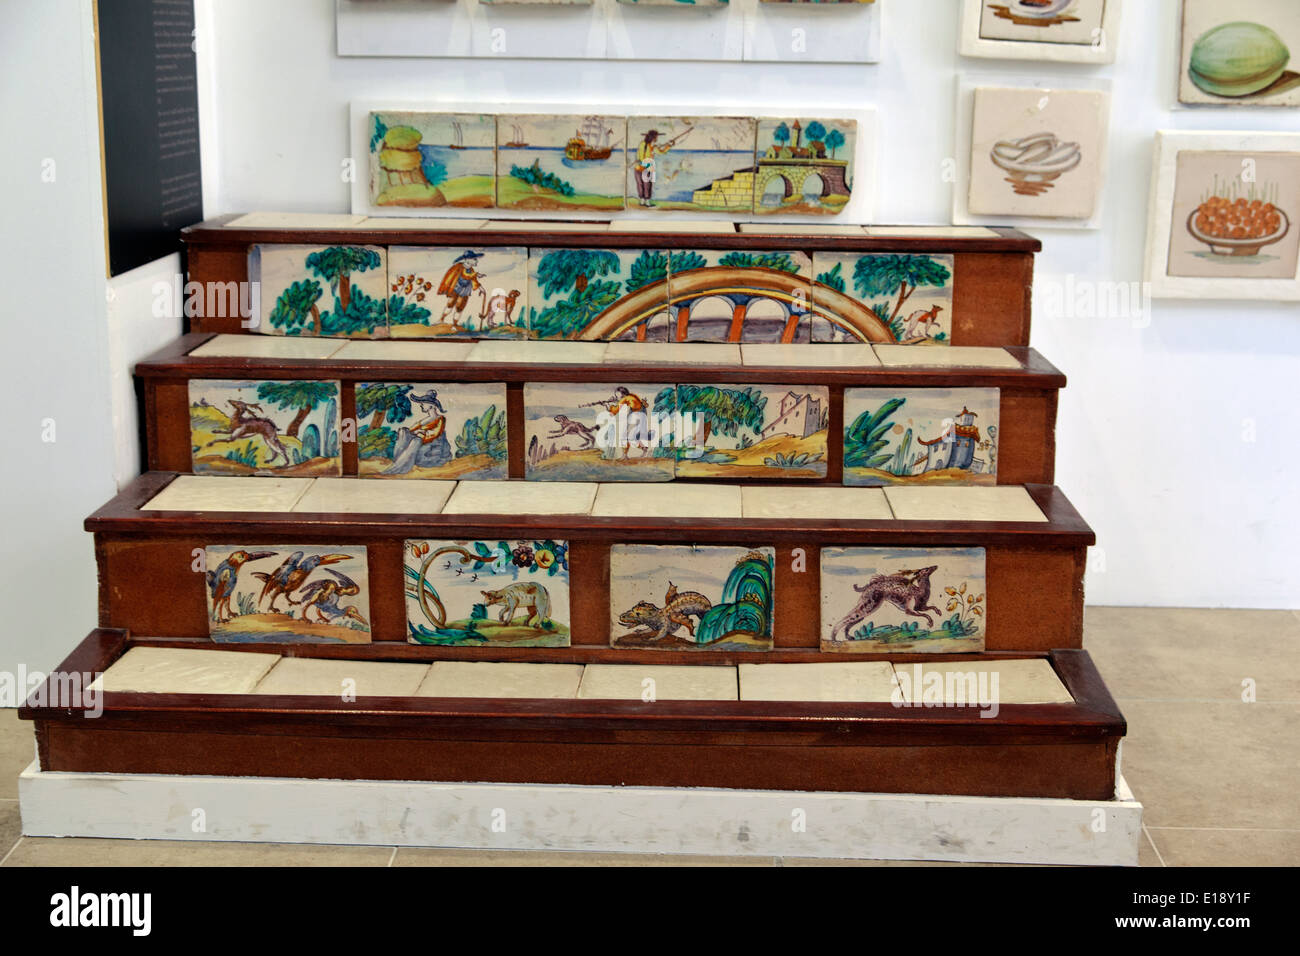 Tiled Steps Display in the Manolo Safont Tile Museum in Onda, Sapin Stock Photo